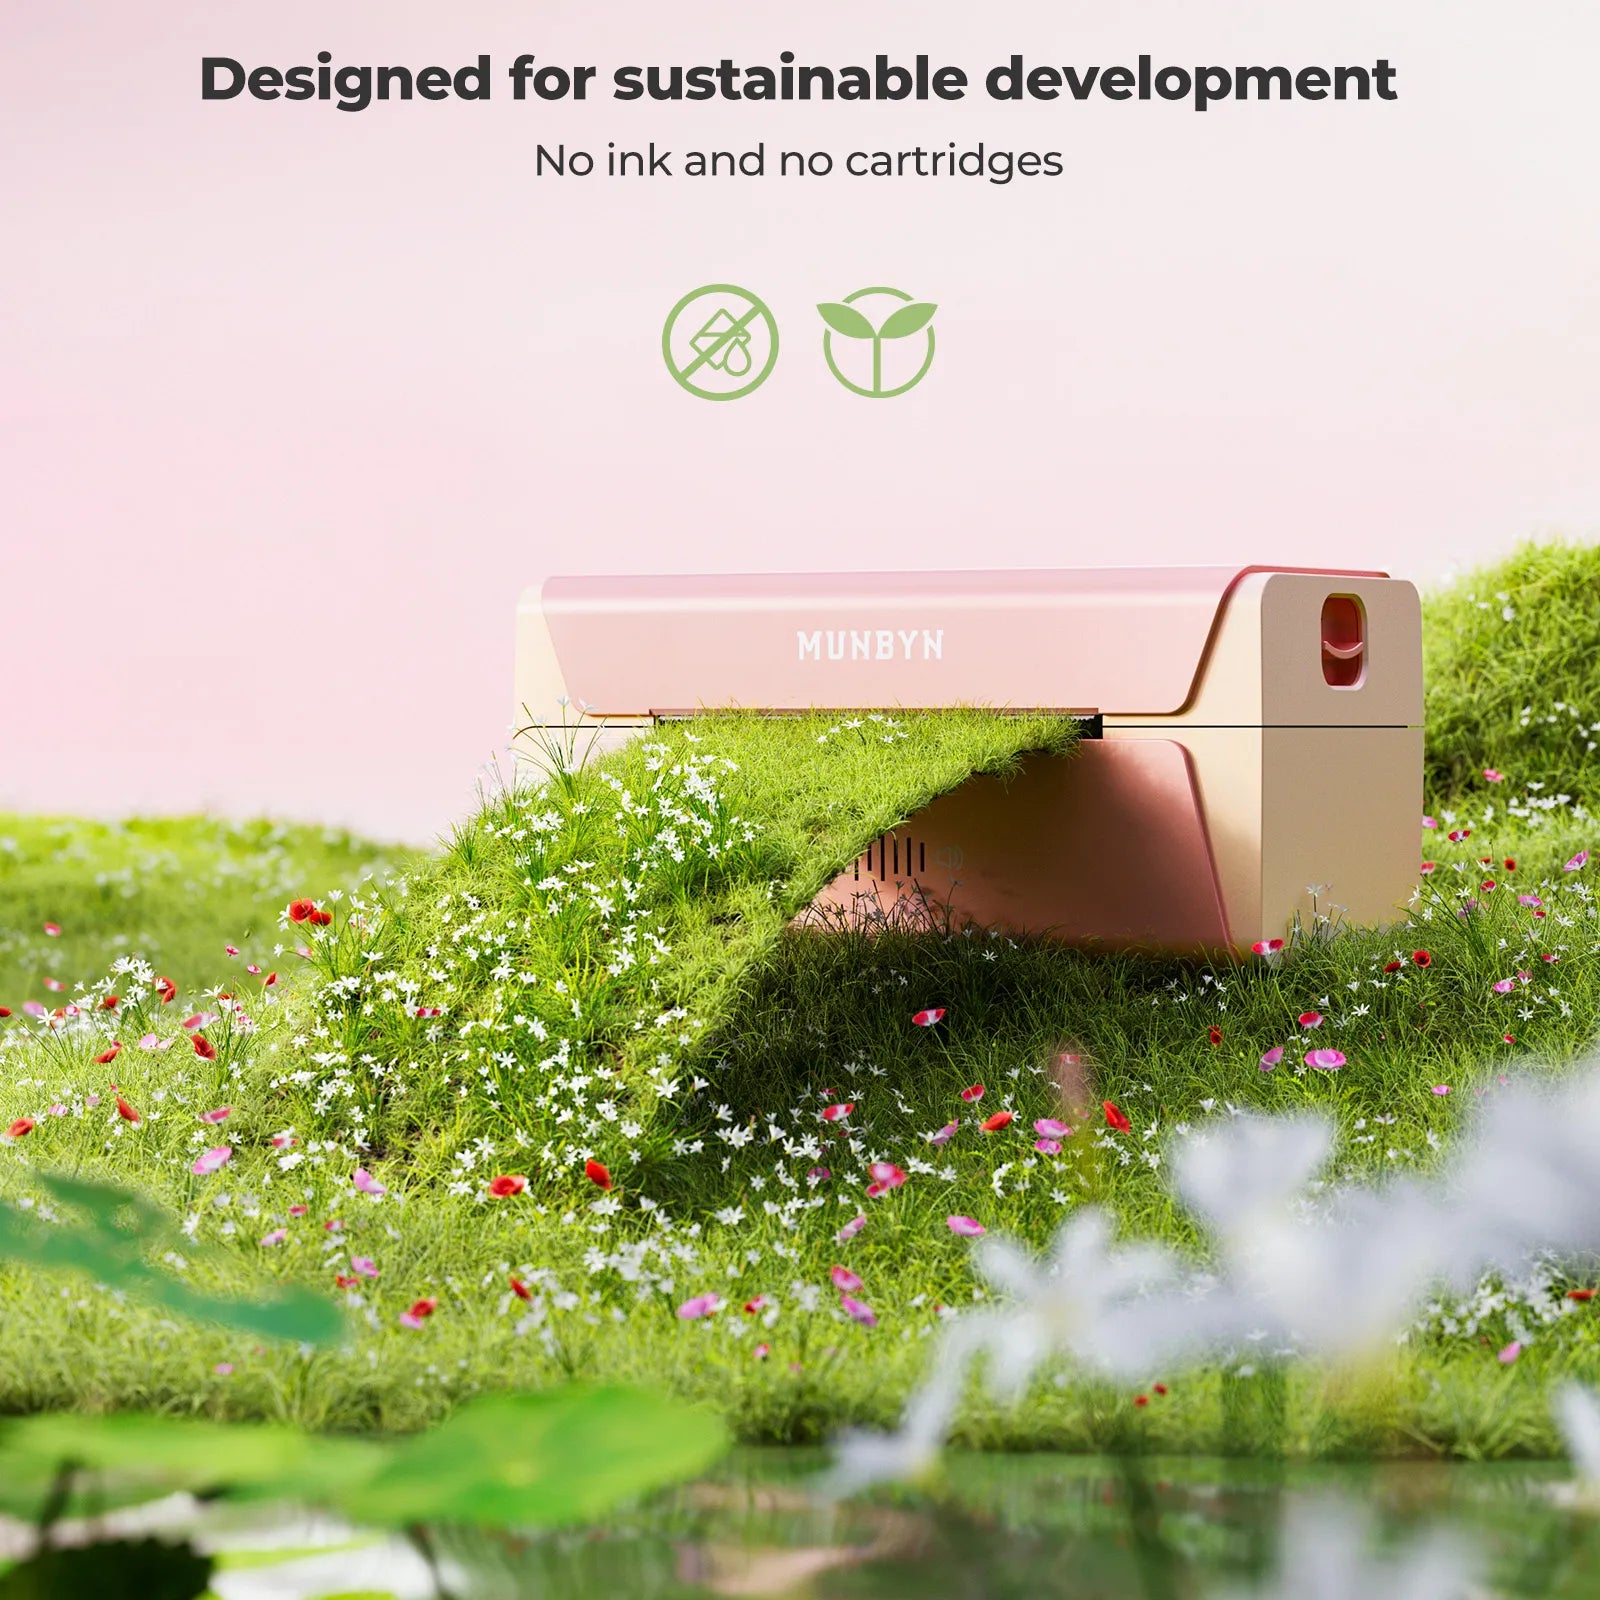 MUNBYN P44S inkless thermal printer is designed for sustainable development.